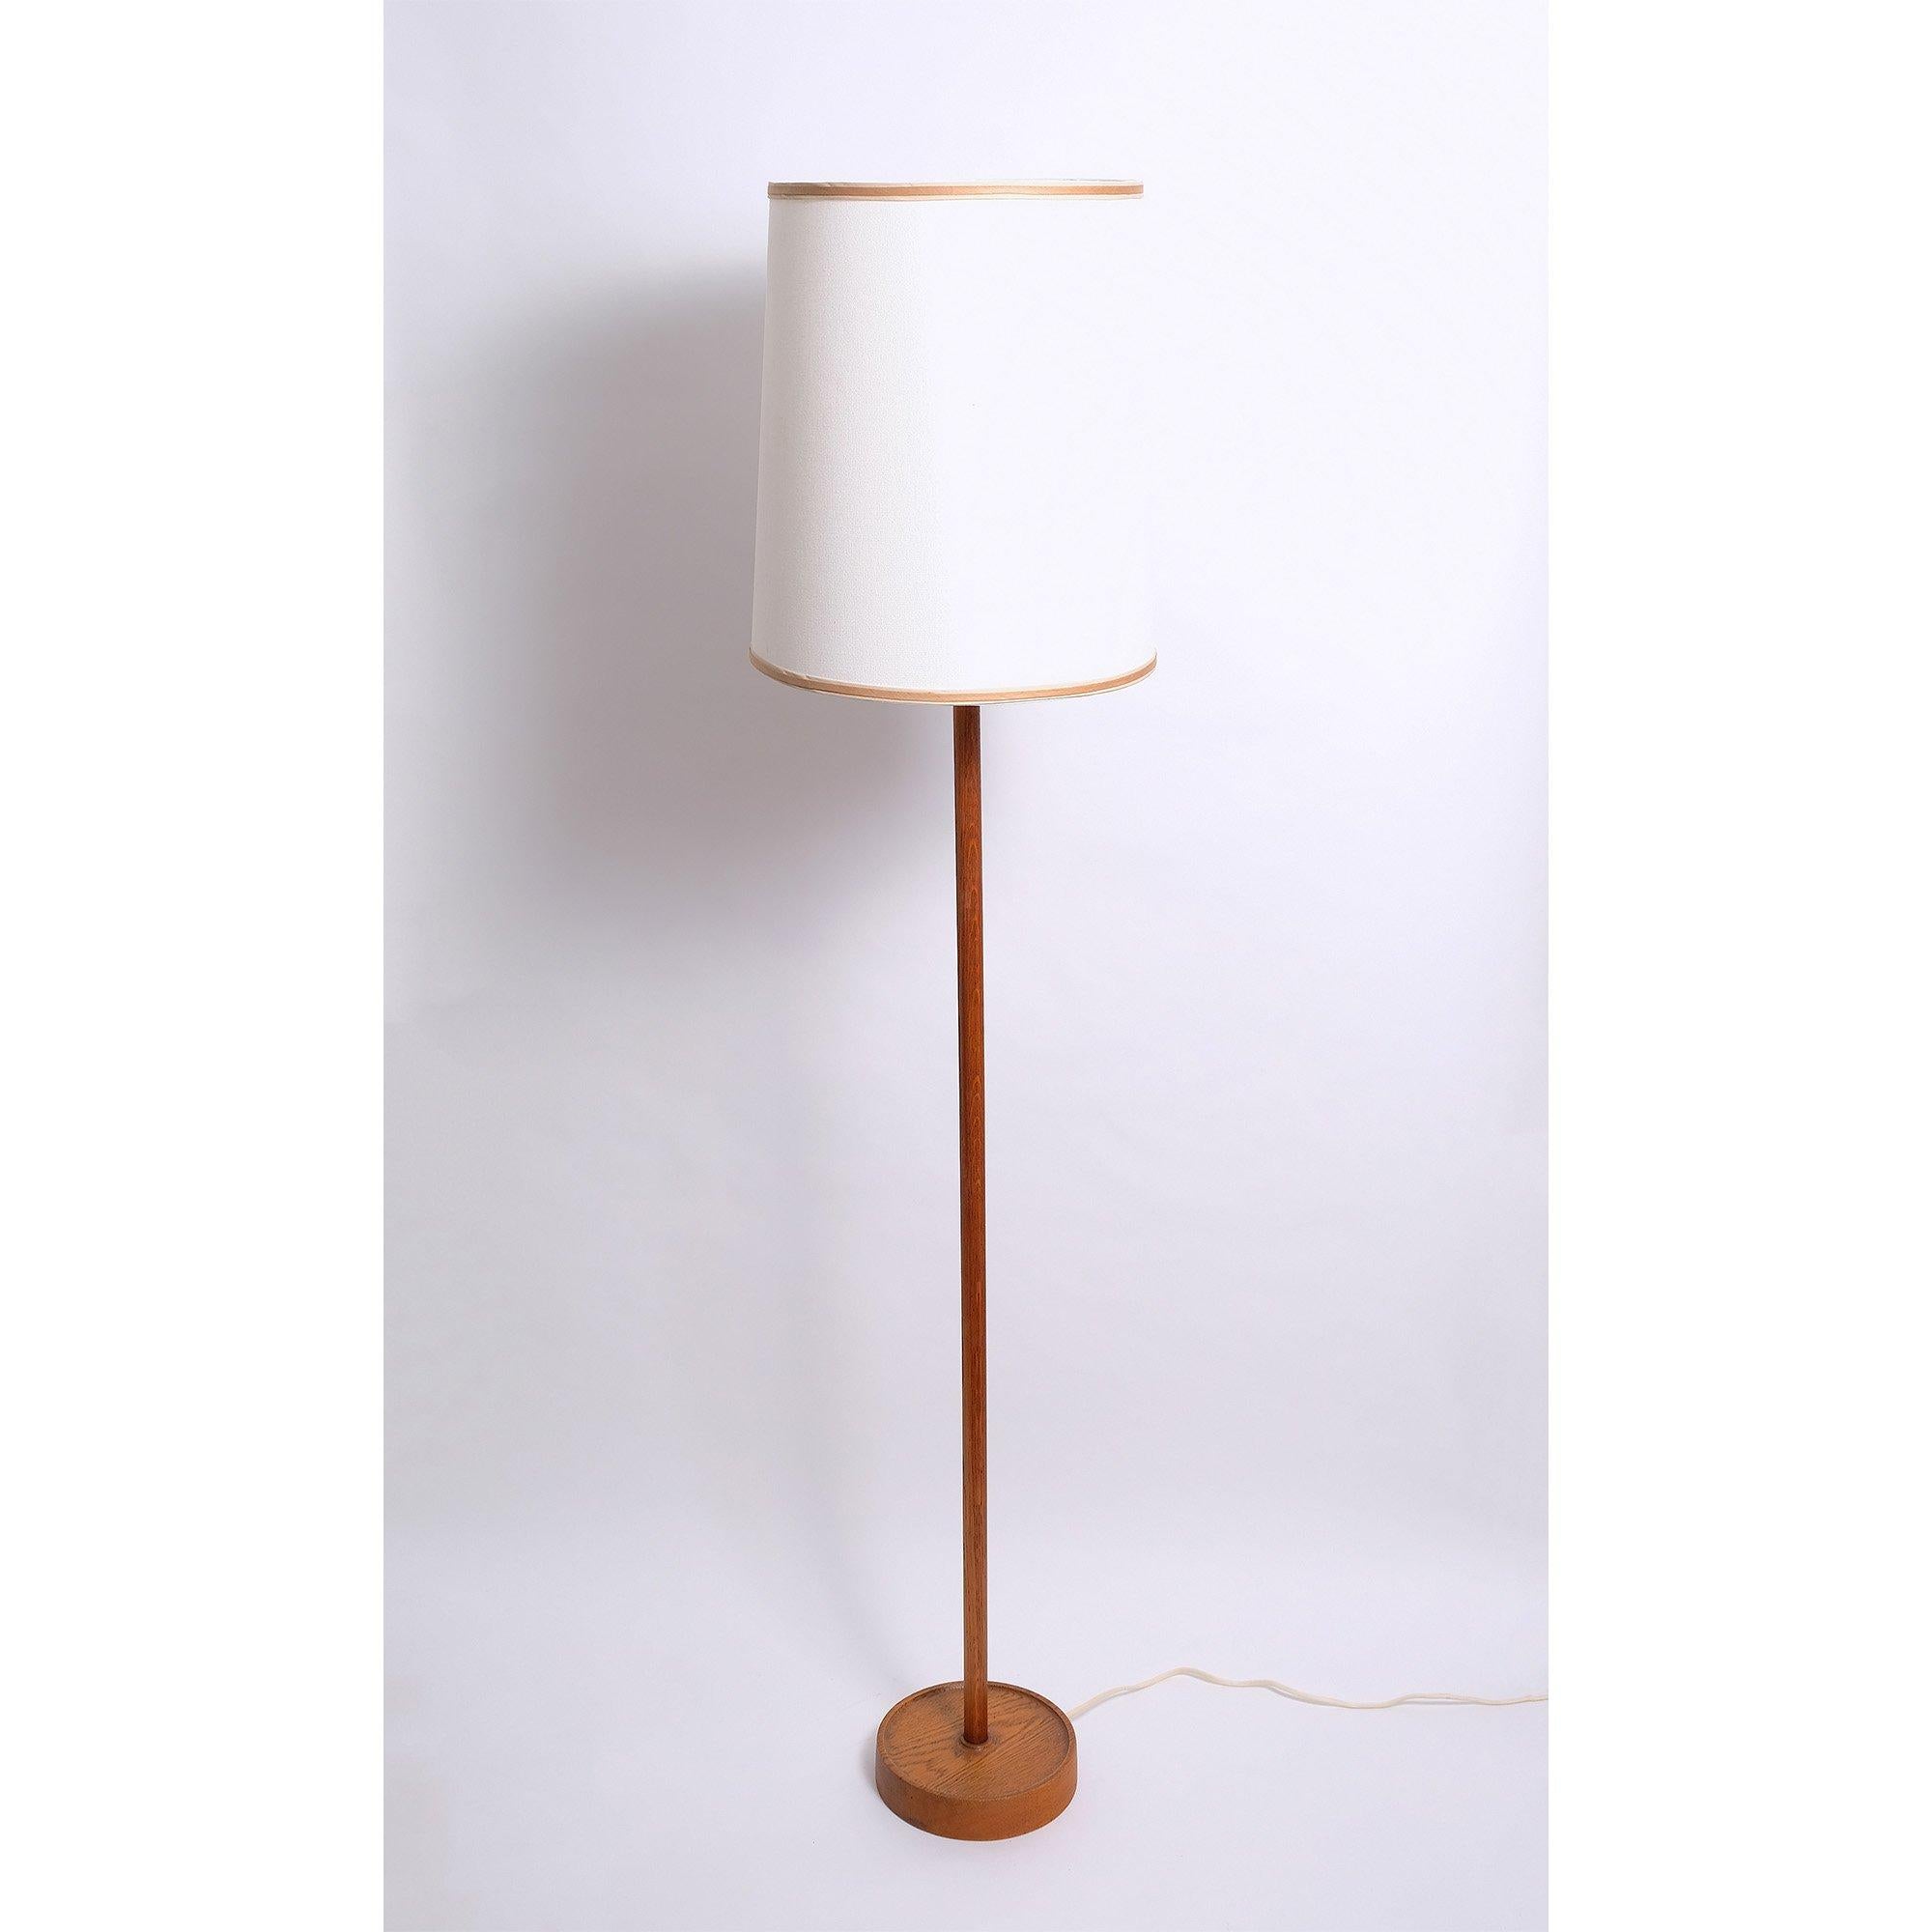 Teak floor lamp by Uno & Östen Kristiansson, Luxus, Sweden, 1950s. Solid teak construction, brass fittings, steel weight under foot. New linen shade is included.  E-12 bulbs, incandescent 40 watts max or higher if LED/CFL

Rewired with new E-12